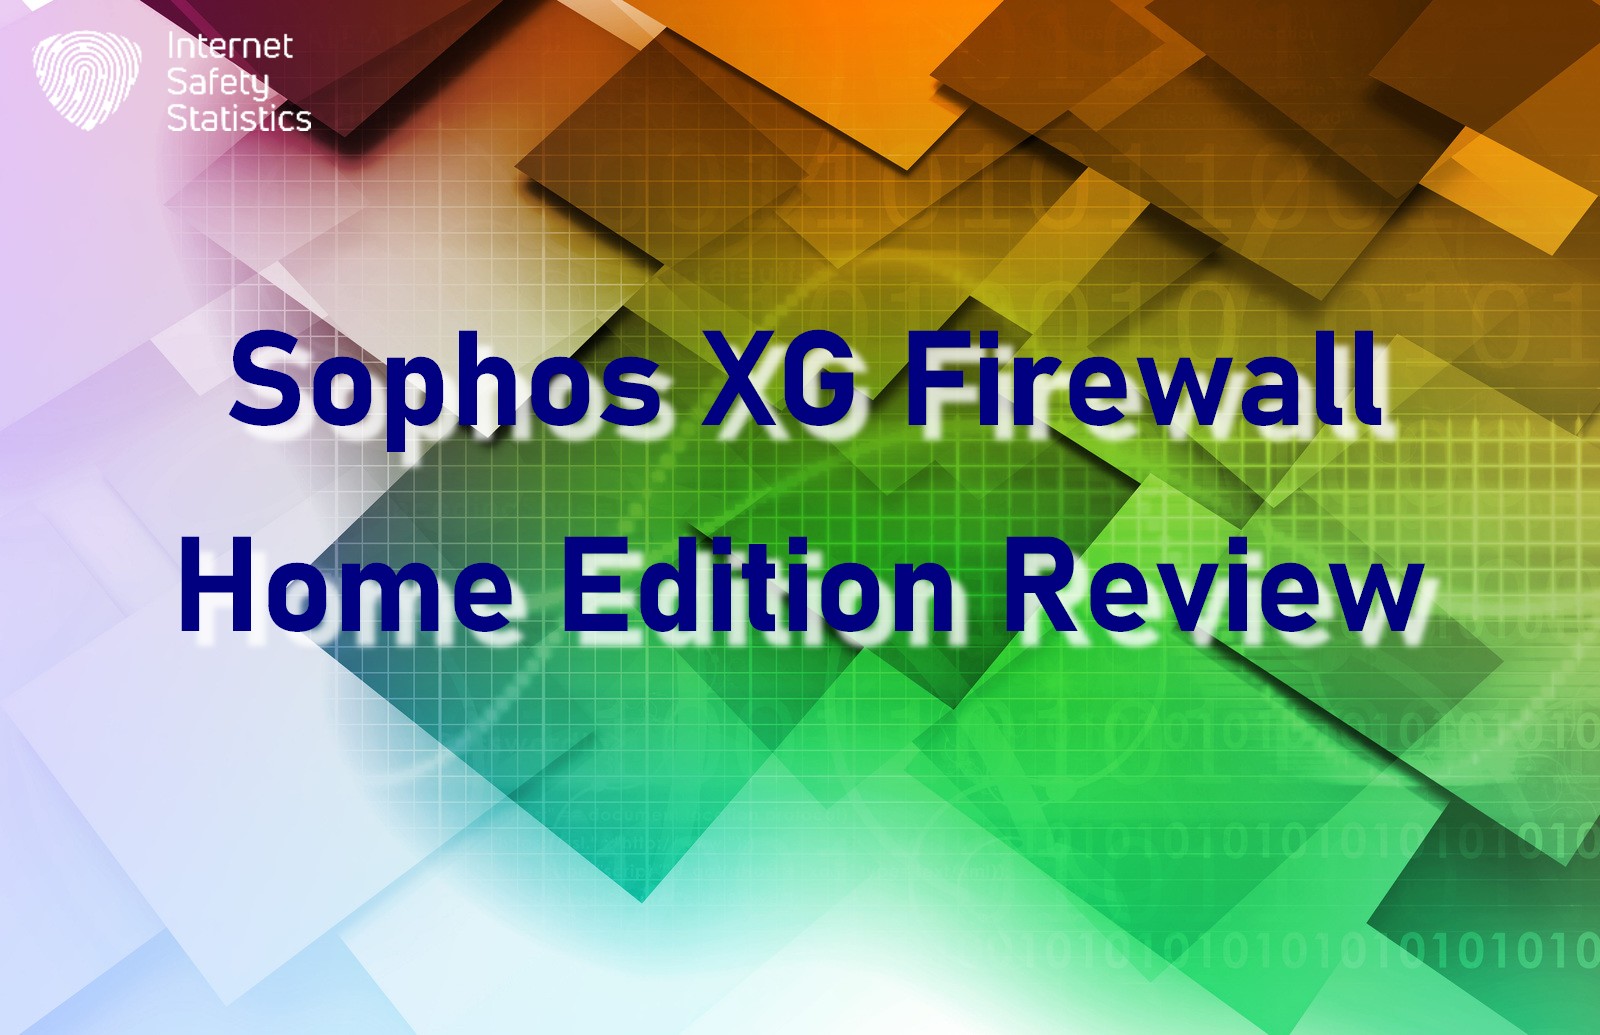 Sophos XG Firewall Home Edition Review: Is It Reliable